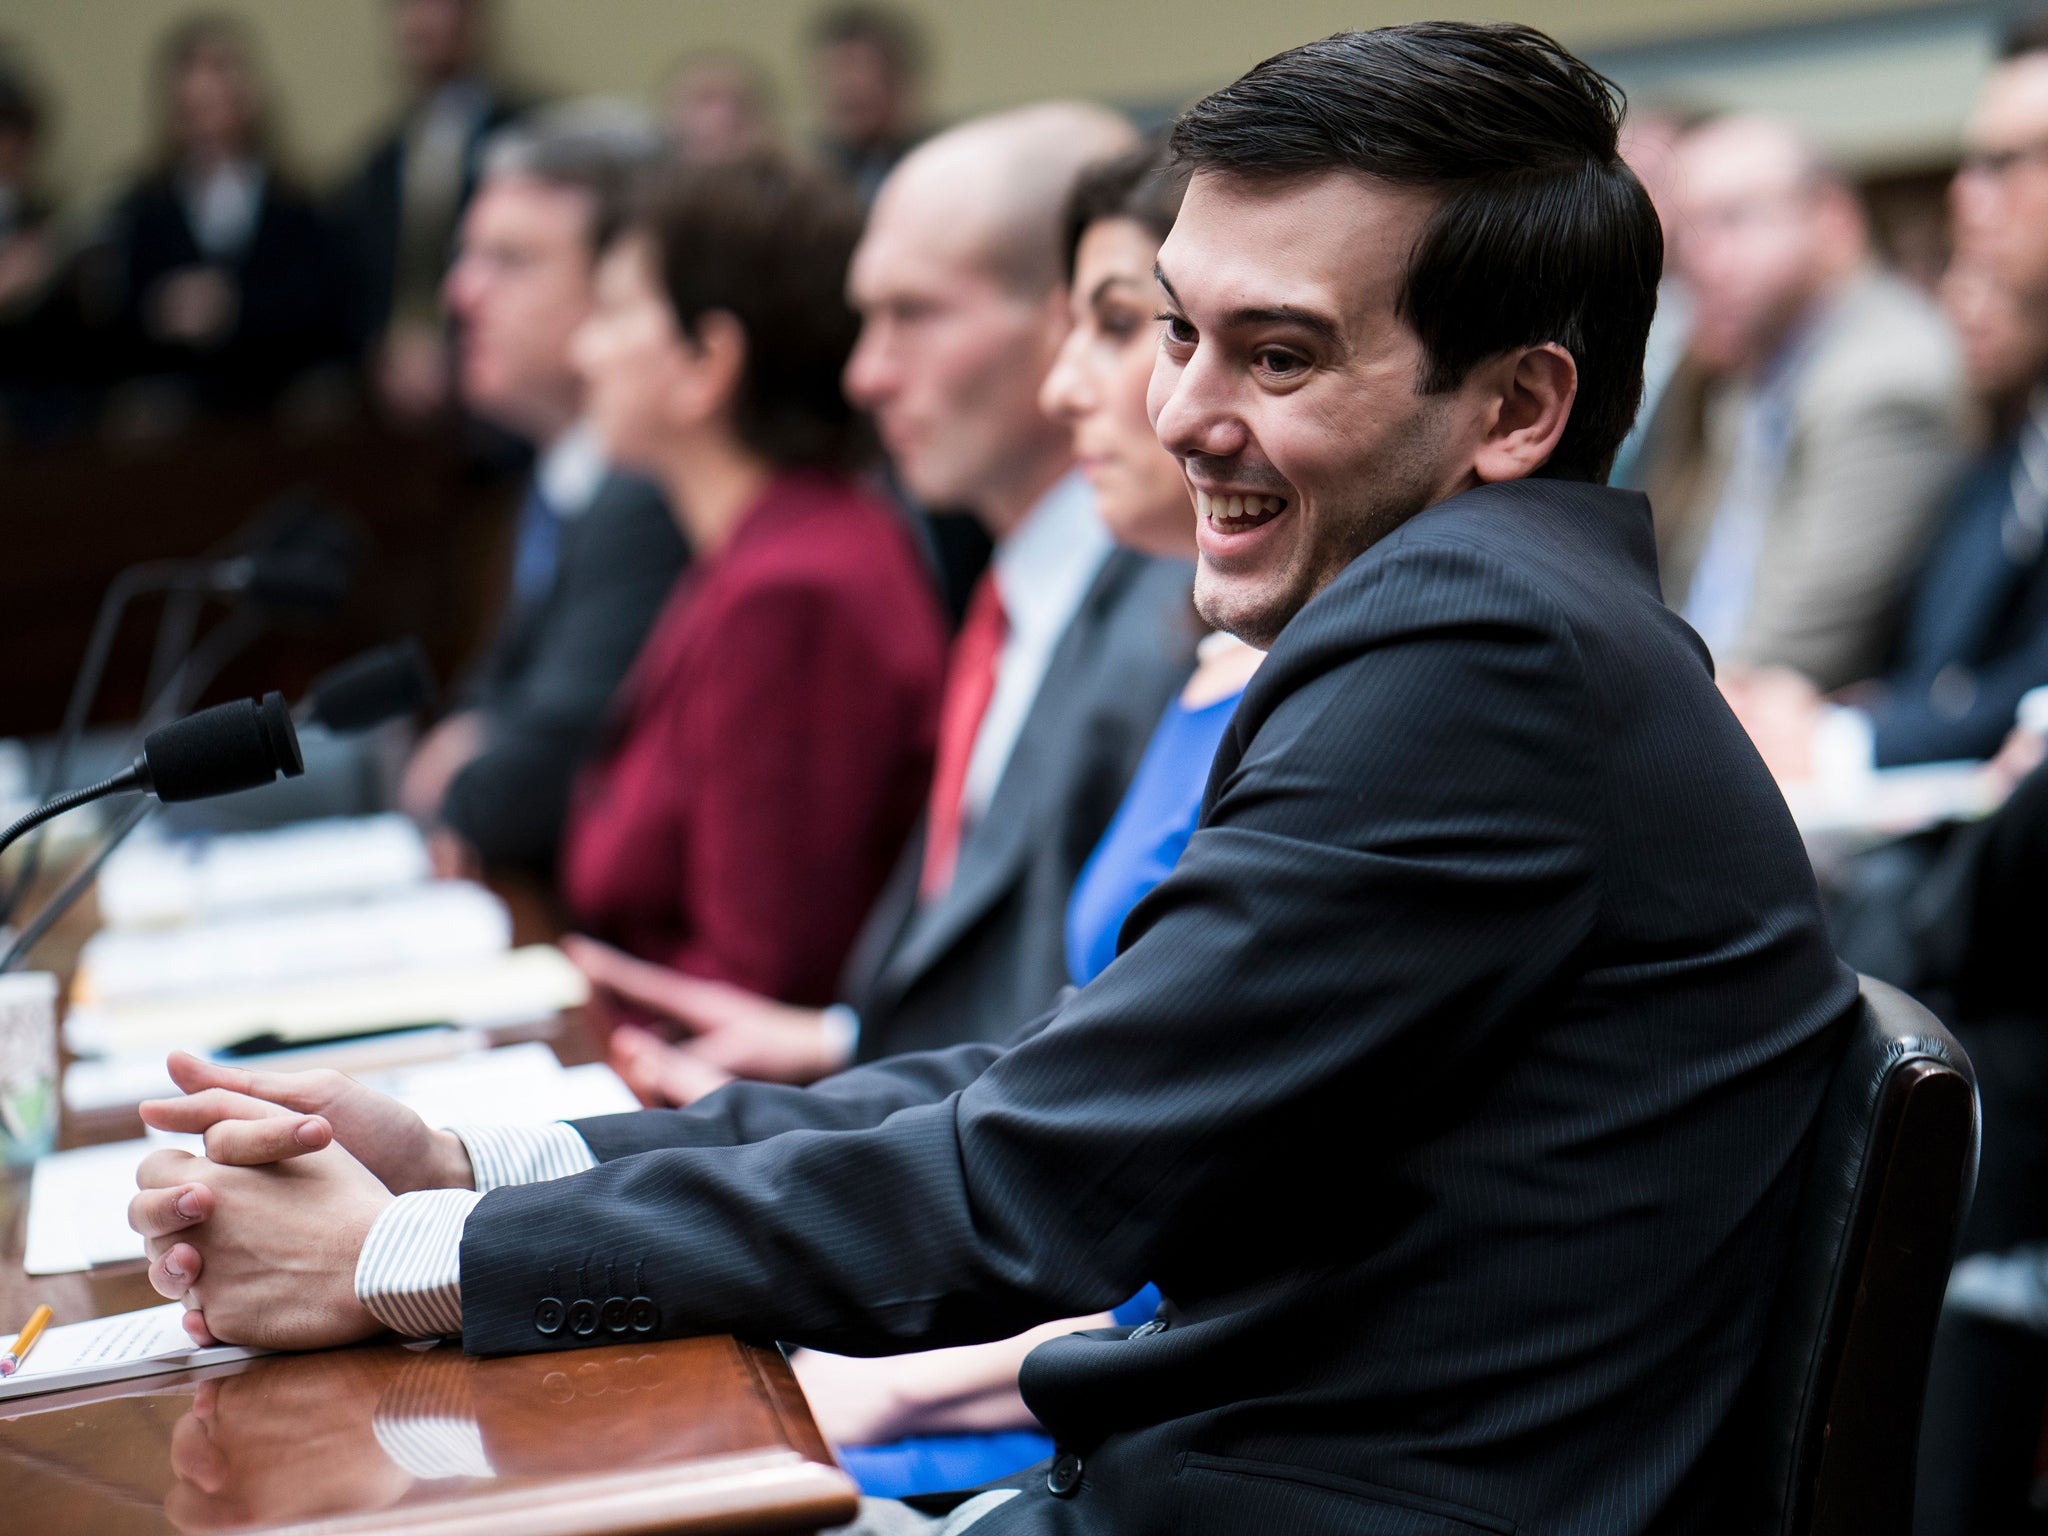 Shkreli during a February hearing with theHouse of Representatives Committee on Oversight and Government Reform. BRENDAN SMIALOWSKI/AFP/Getty Images